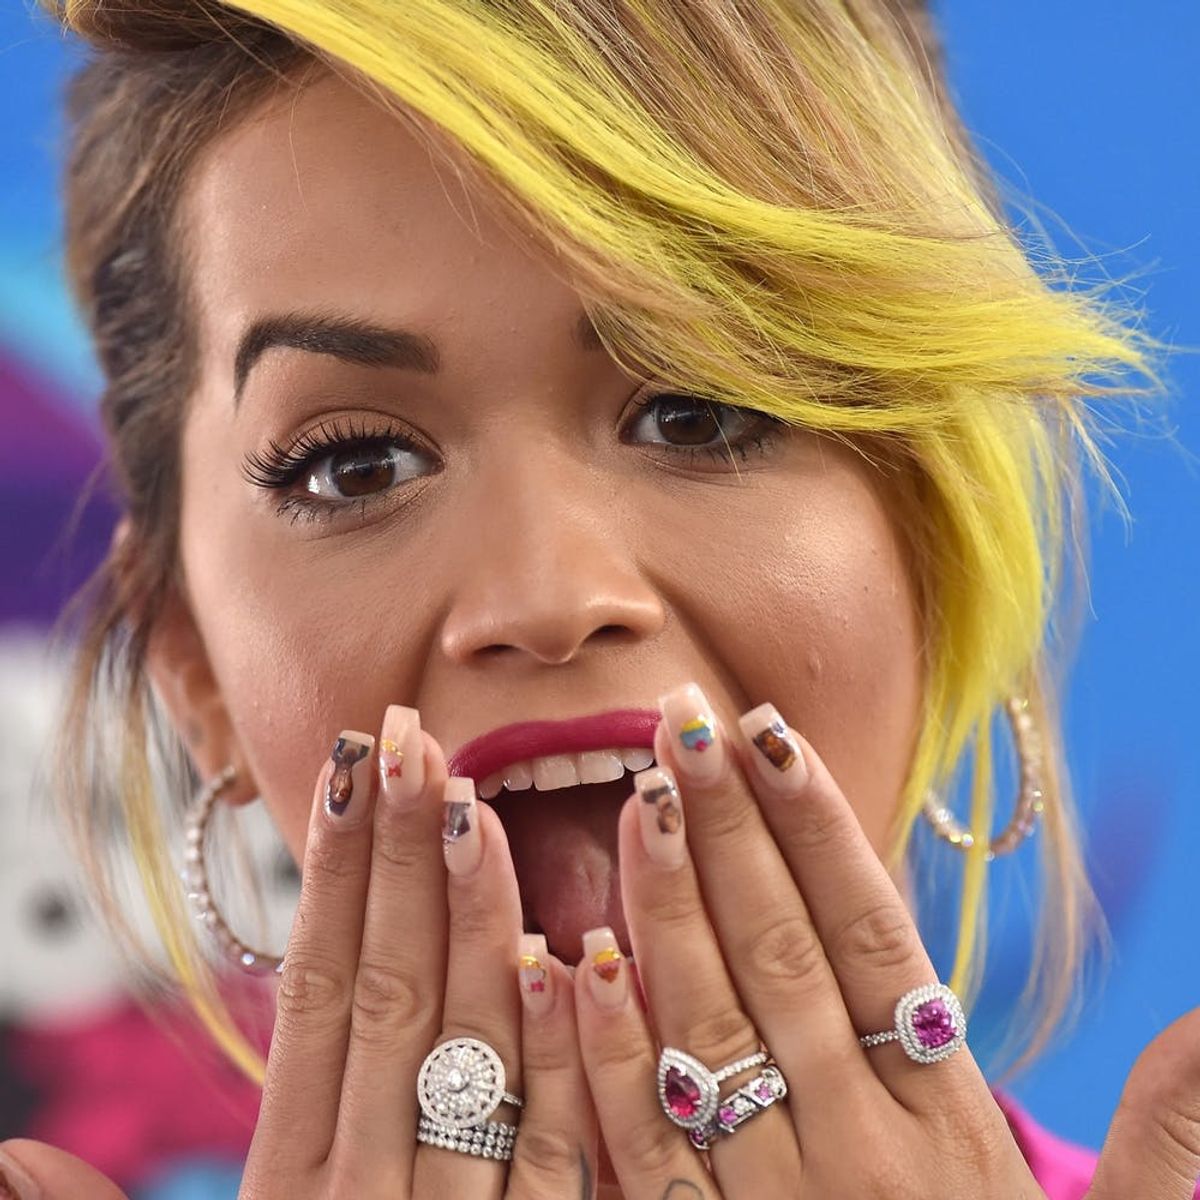 9 Celeb Manicure Trends That Are Going to Blow Up in 2018